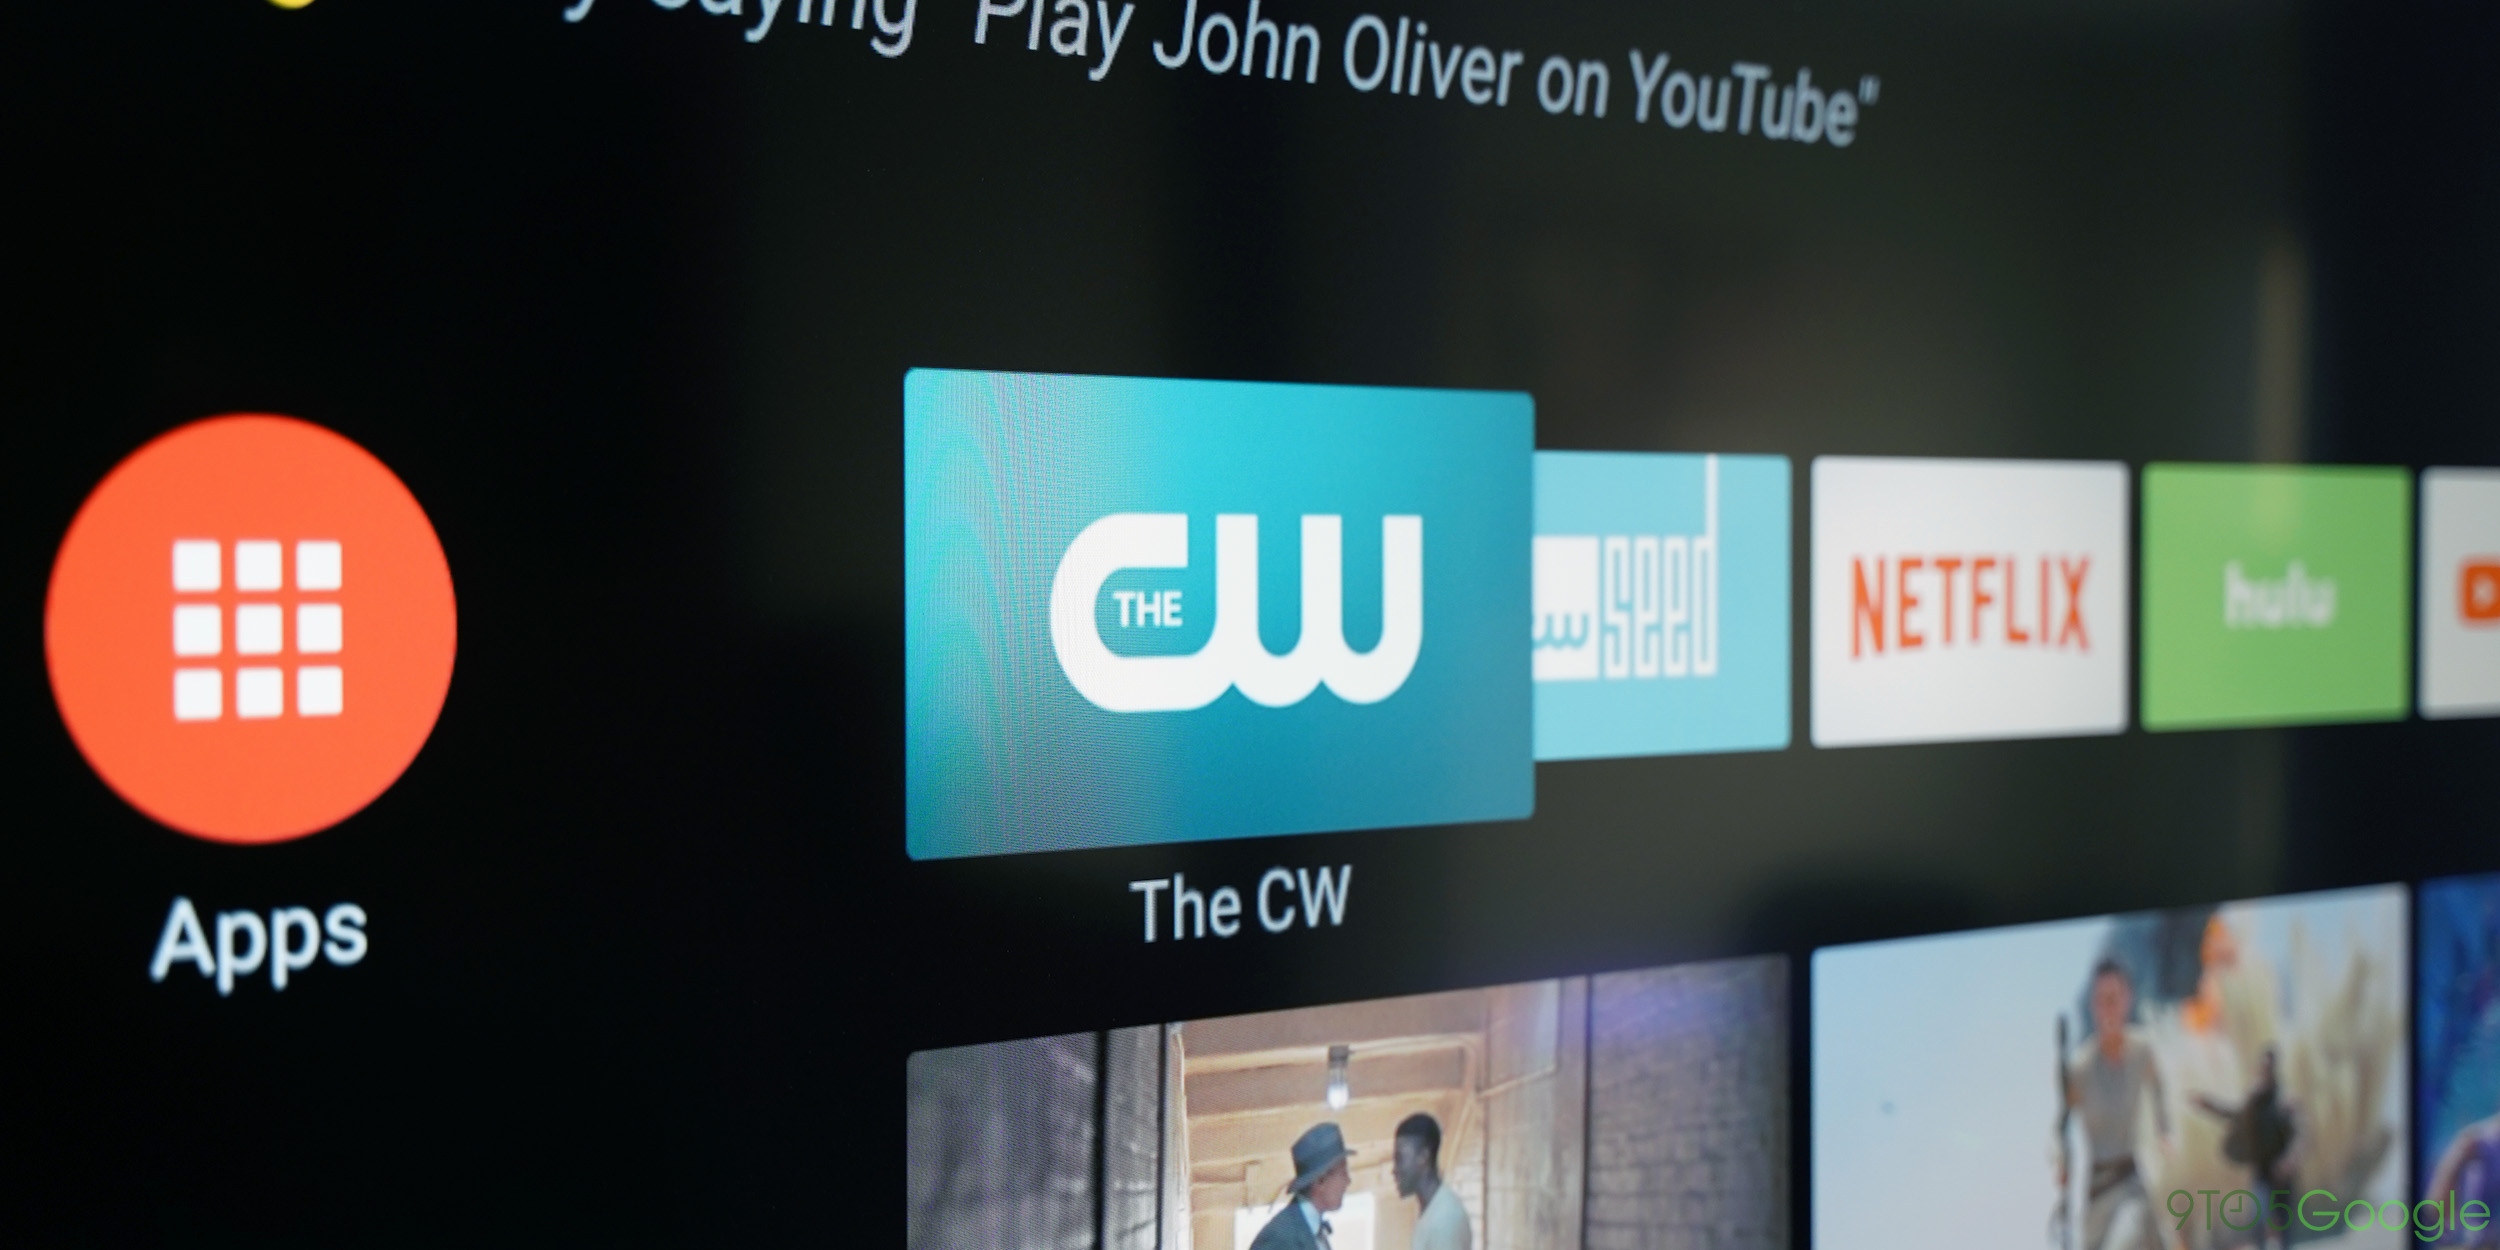 How to Get Cw App on Samsung Smart Tv? 